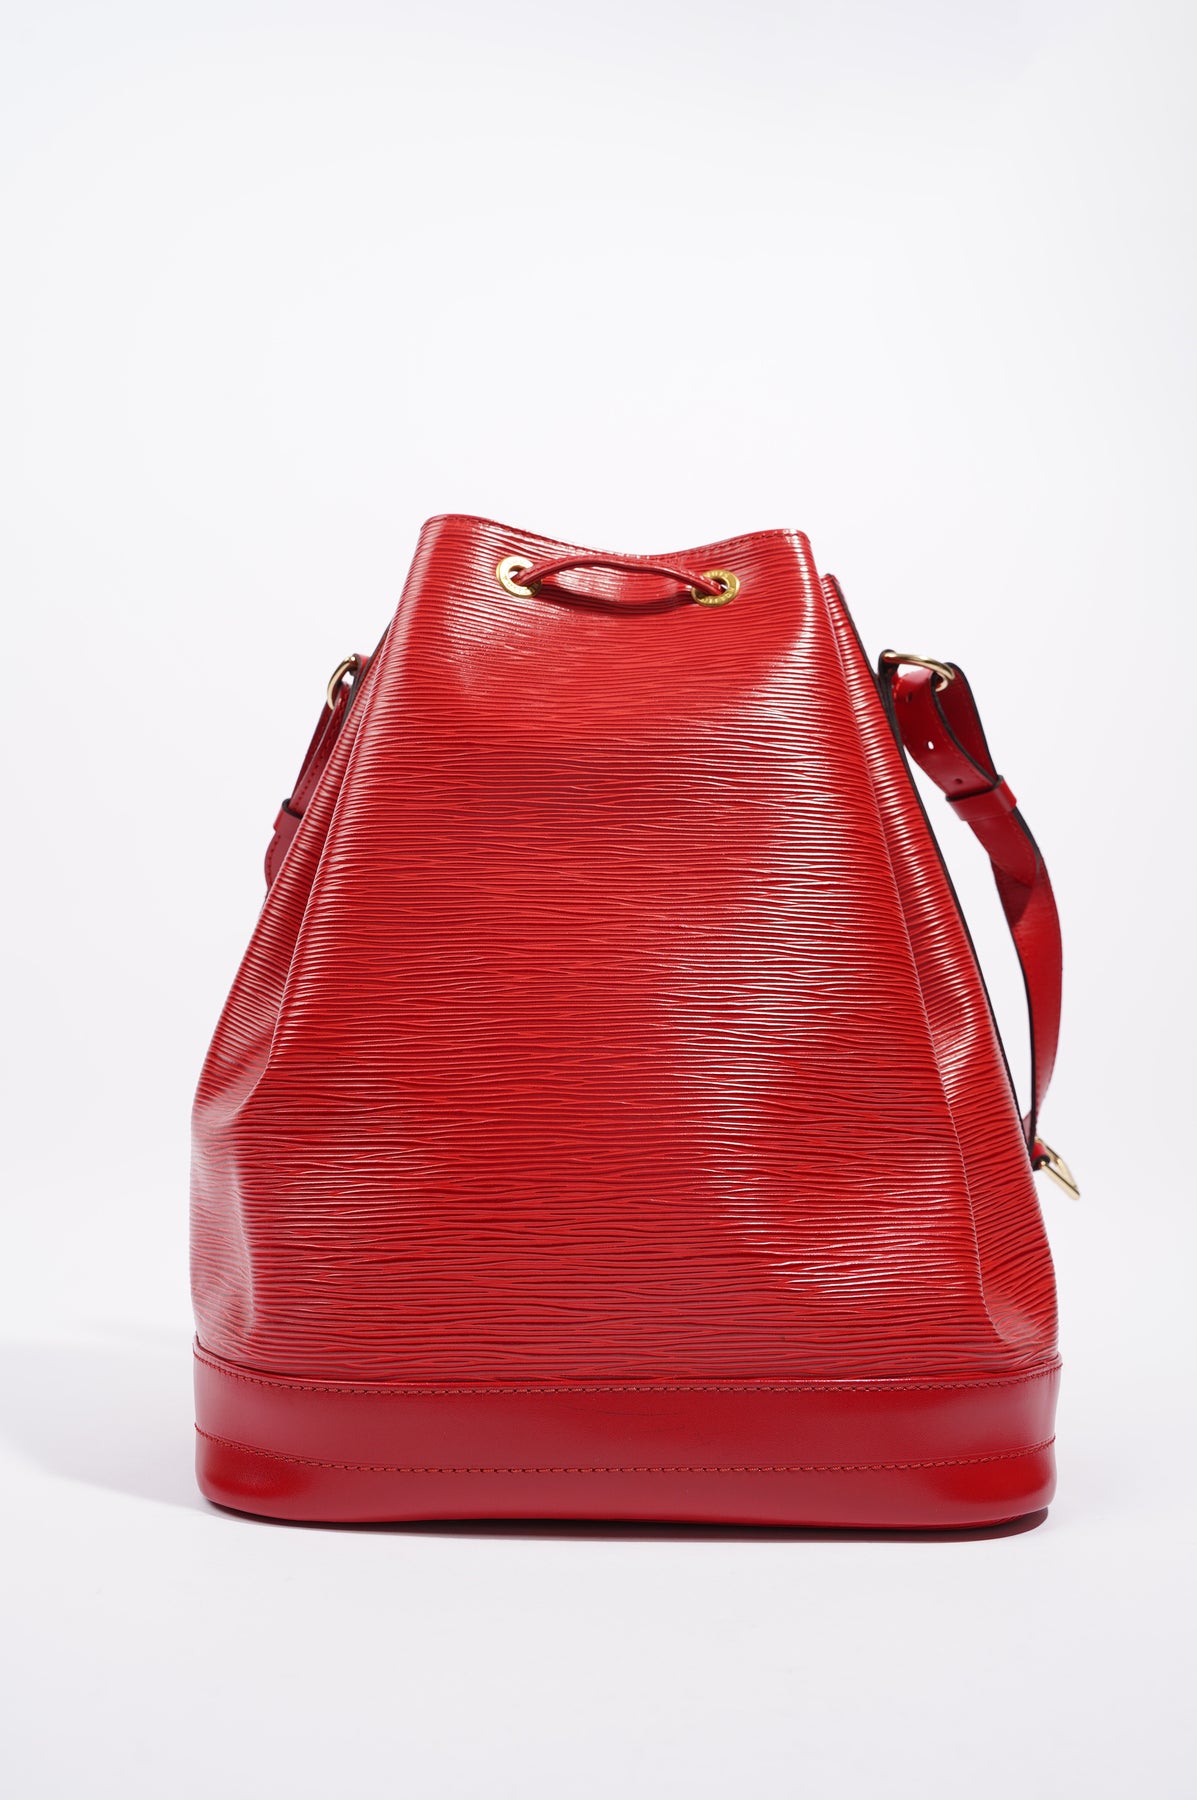 Louis Vuitton Noe Bag Red Epi Leather GM – Luxe Collective